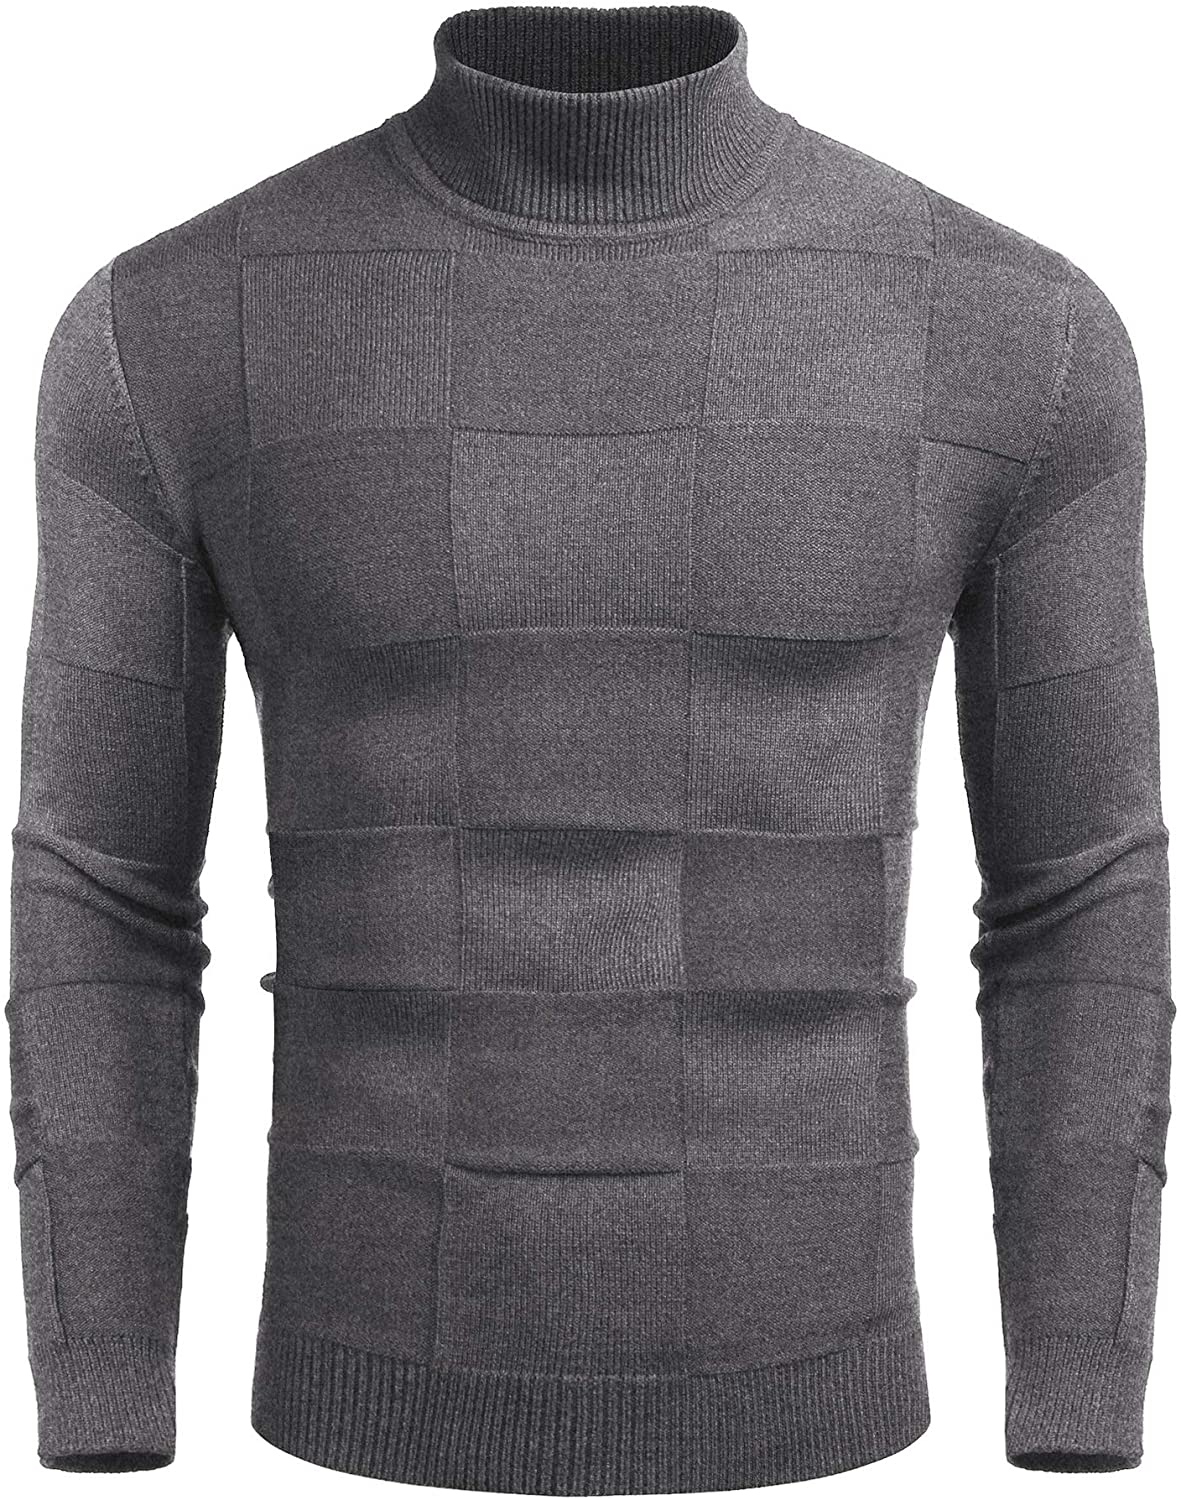 COOFANDY Men Turtleneck Sweaters Slim Fit Long Sleeve Ribbed Knit Pullover Sweater 